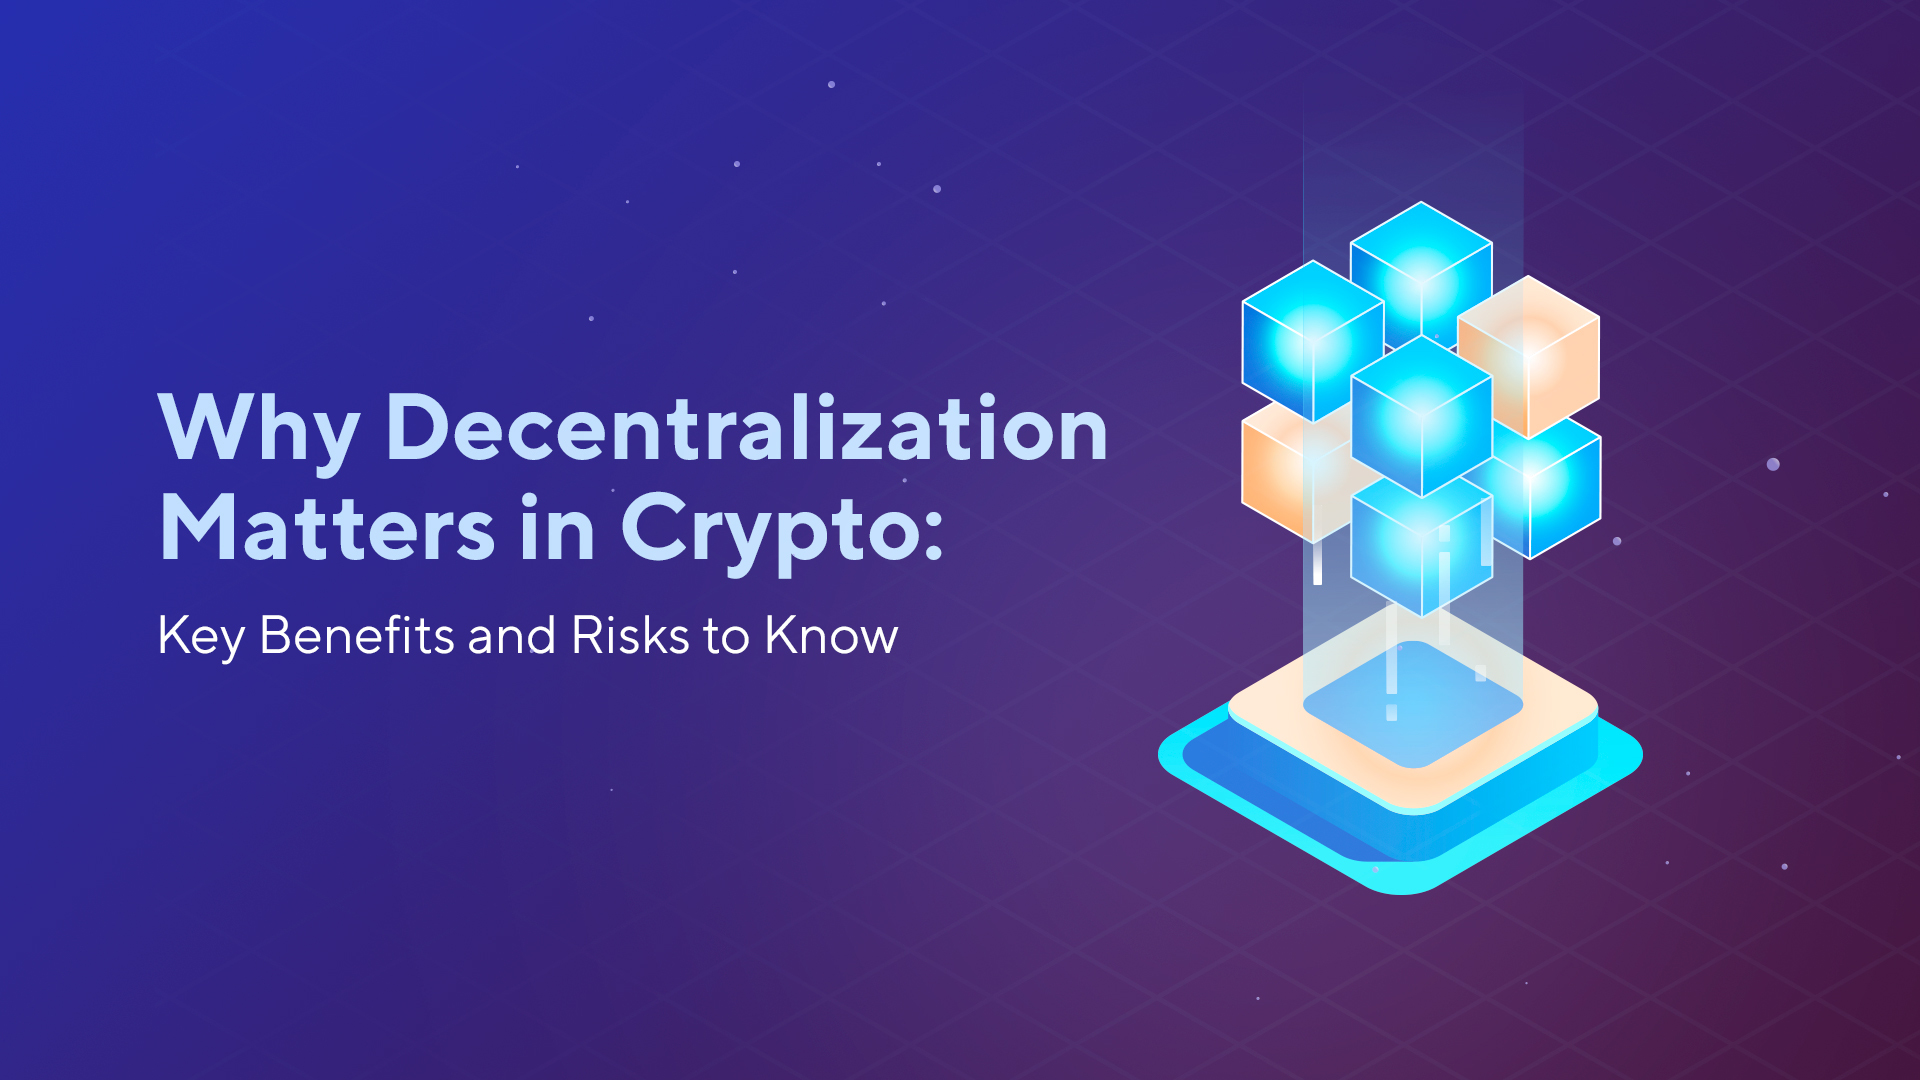 Why Decentralization Matters in Crypto: Key Benefits and Risks to Know